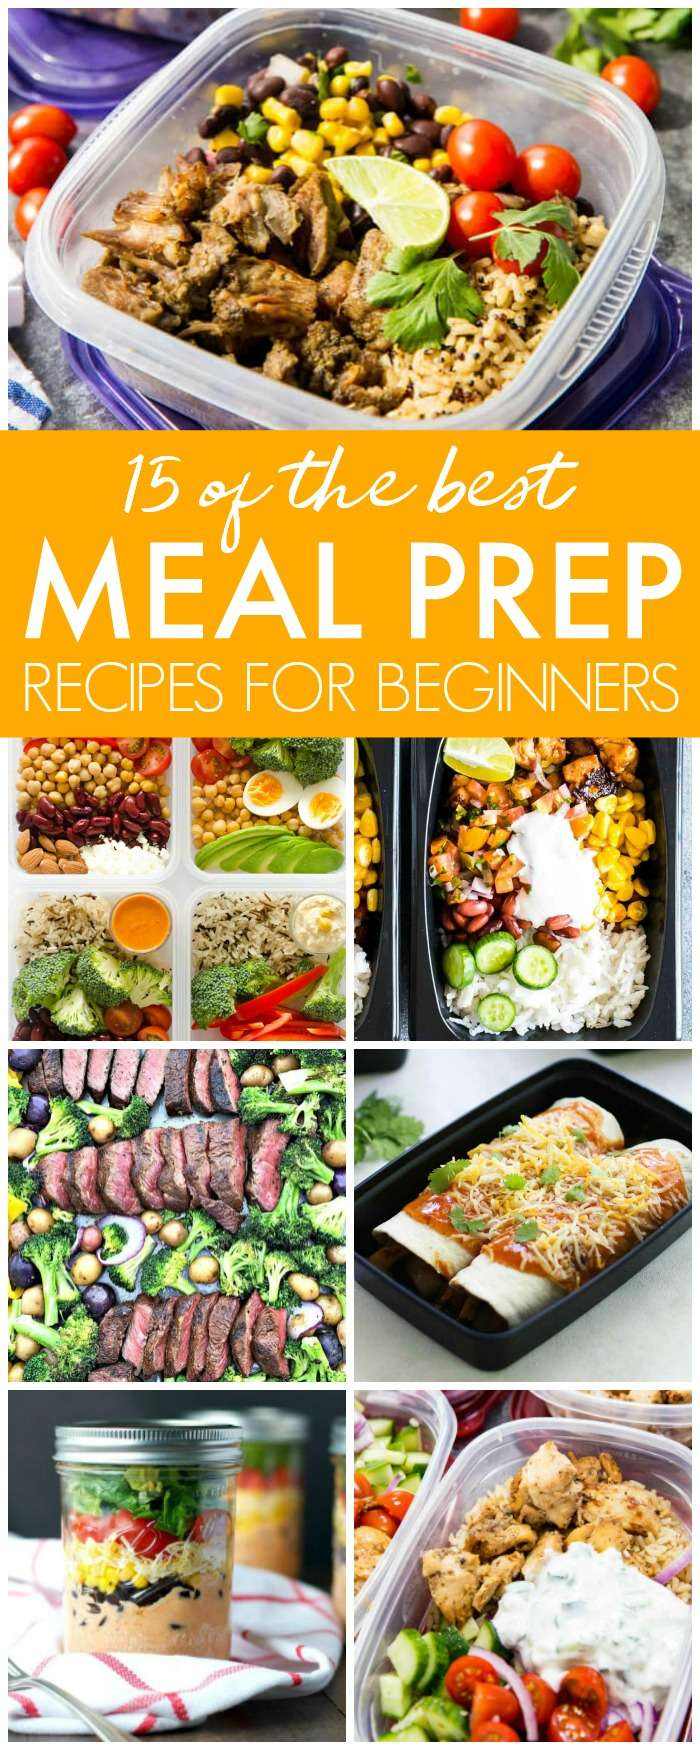 15 of the Best Meal Prep Recipes - Passion For Savings -   18 meal prep recipes for the week lunches ideas